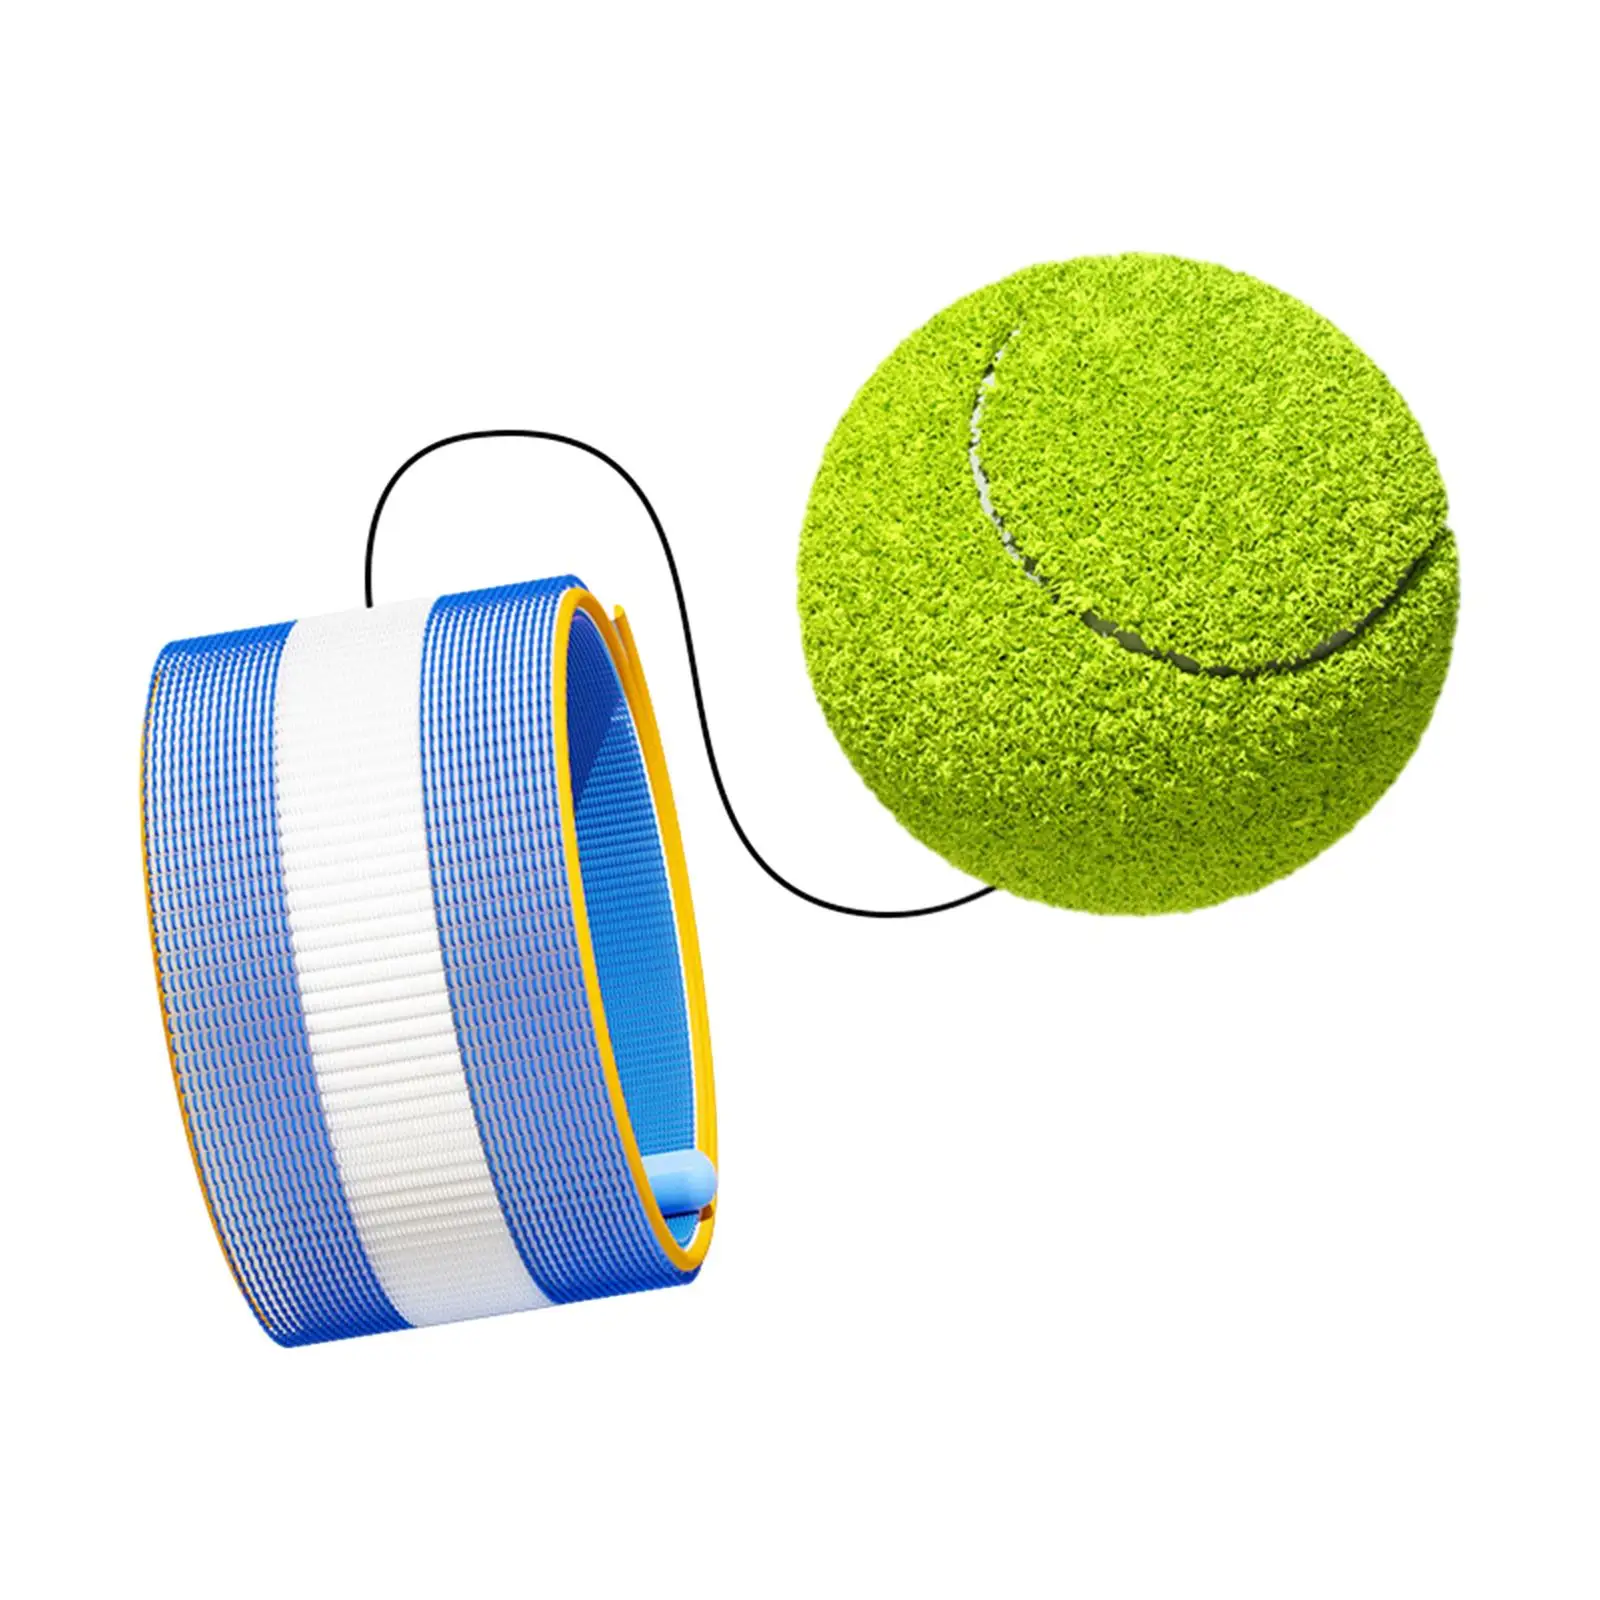 Rubber Rebound Ball Wrist Exercise Sports Reaction Ball Sports Bouncy Ball Outdoor Wristband Toys for Adults Kids Party Favor